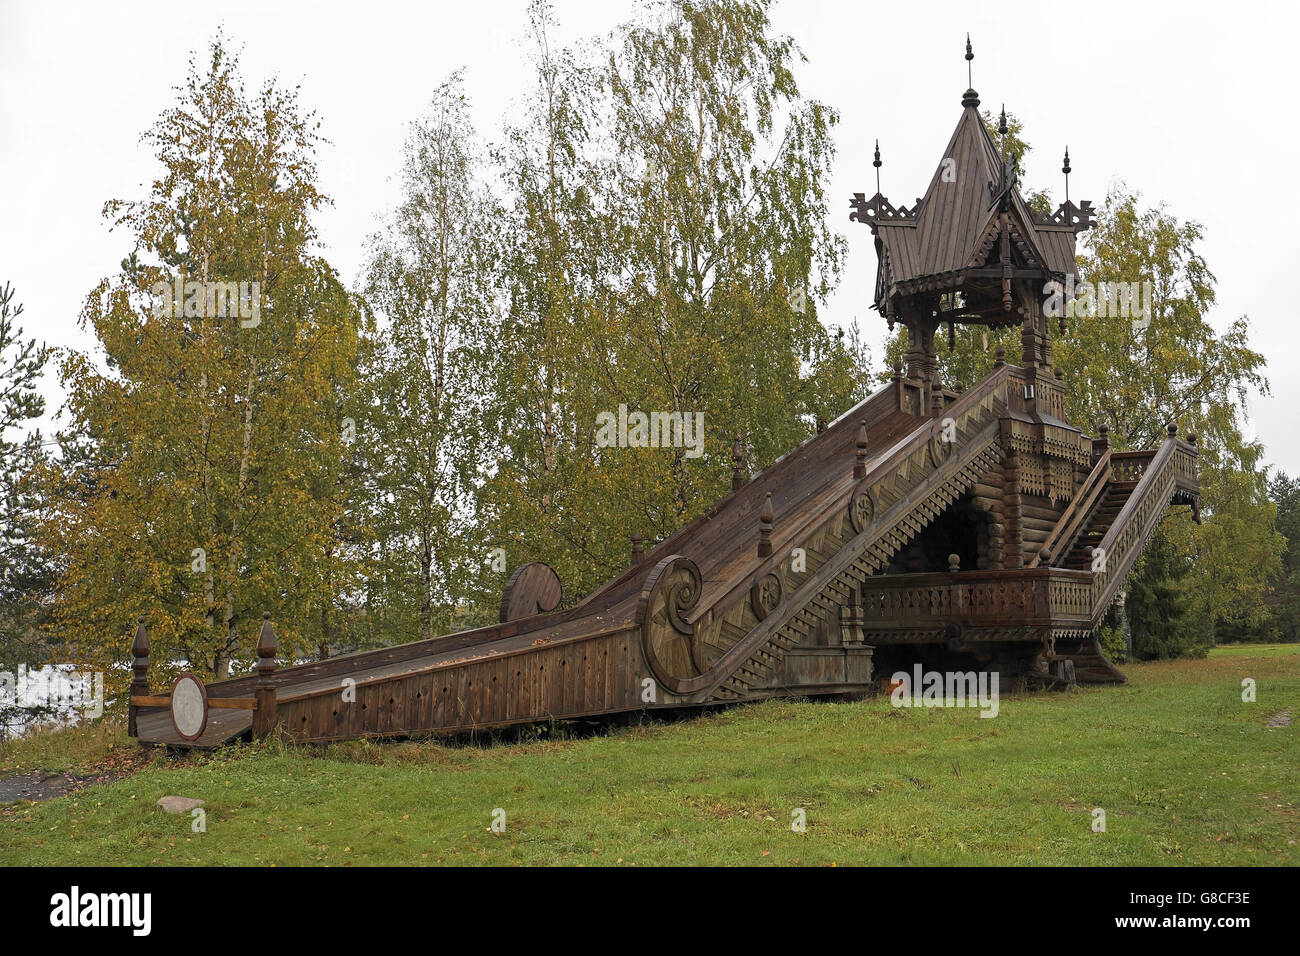 Ornately carved wooden slide, Mandrogy (on Svir River to the east of St Petersburg), Russia. Stock Photo